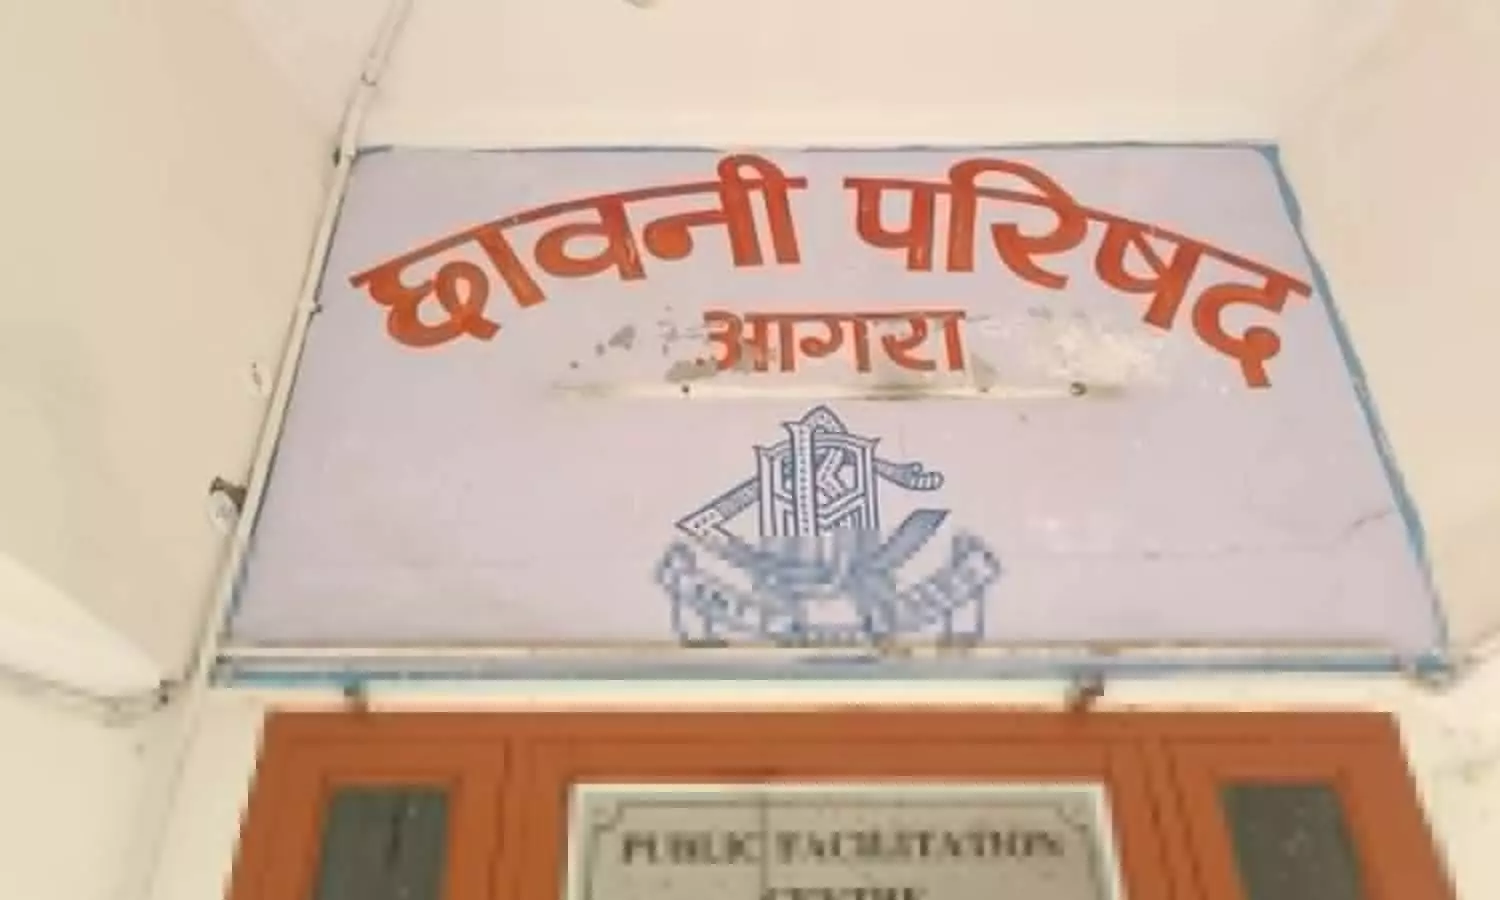 The commissioners office, railways, PWD and post office are among the major defaulters of the Cantonment Board in Agra.